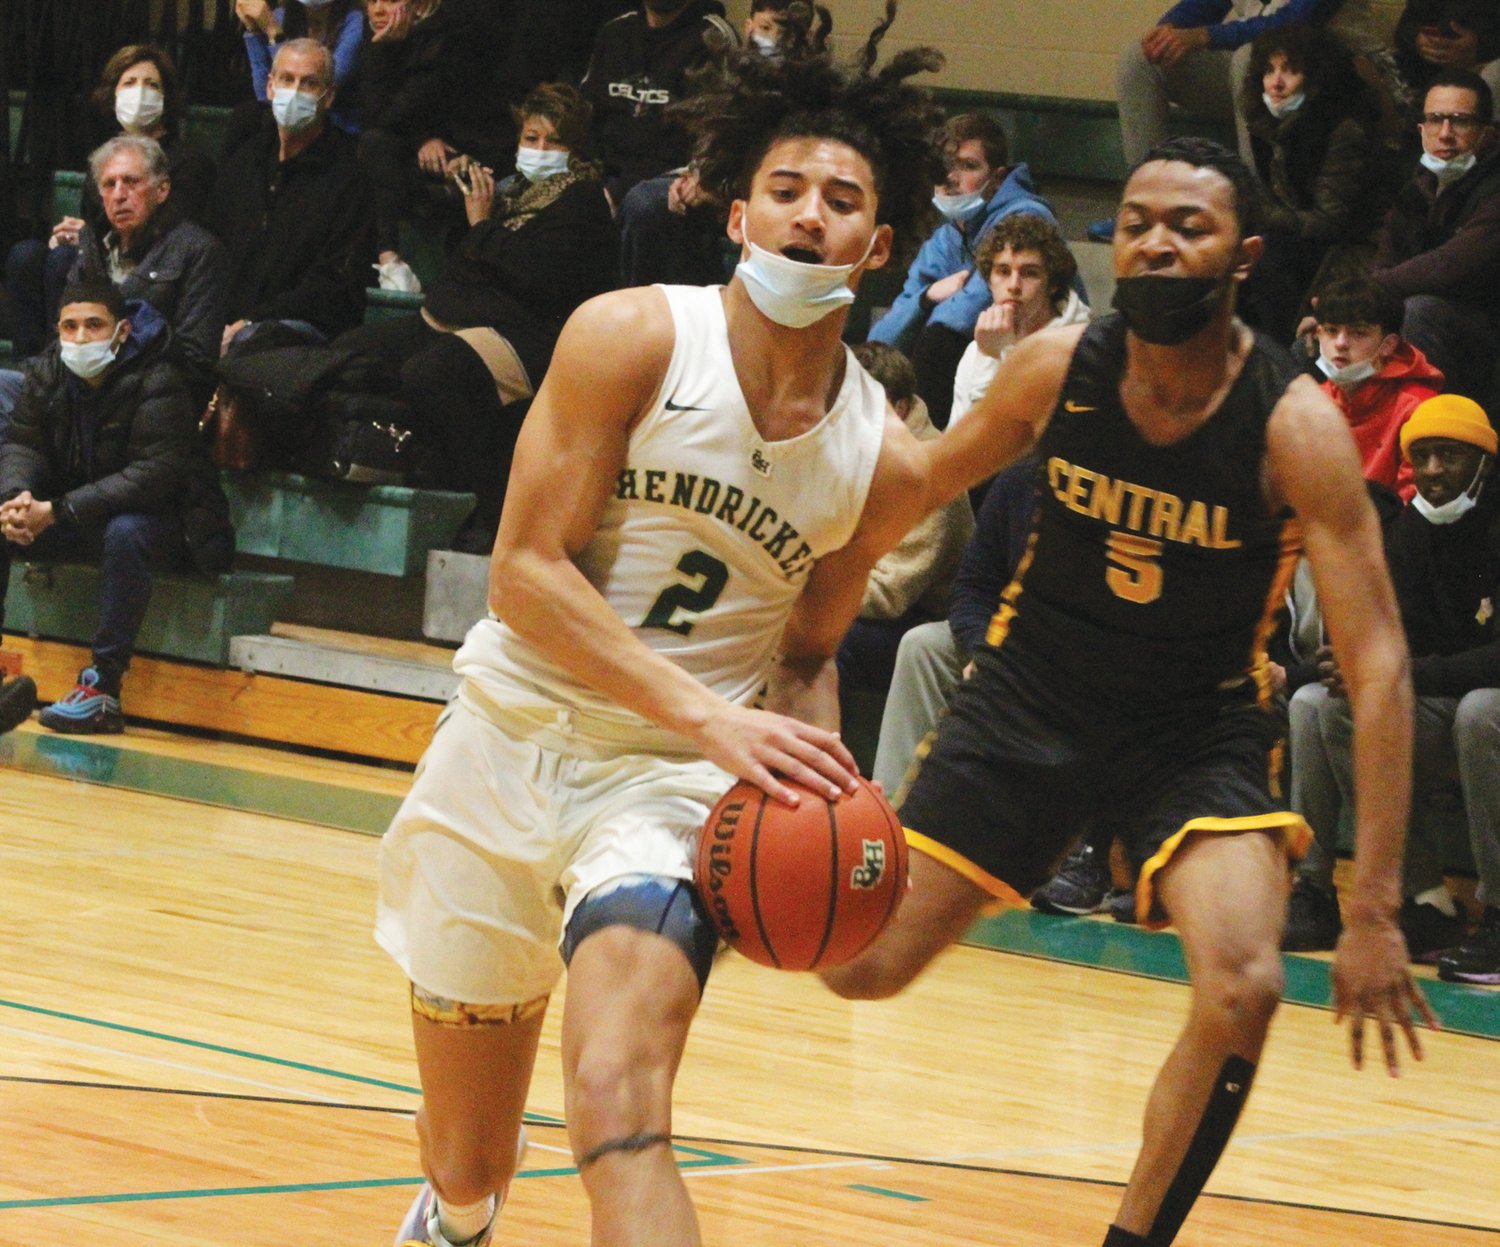 SEMIS BOUND: Hendricken’s Cameron Chinn drives
to the hoop on Tuesday.